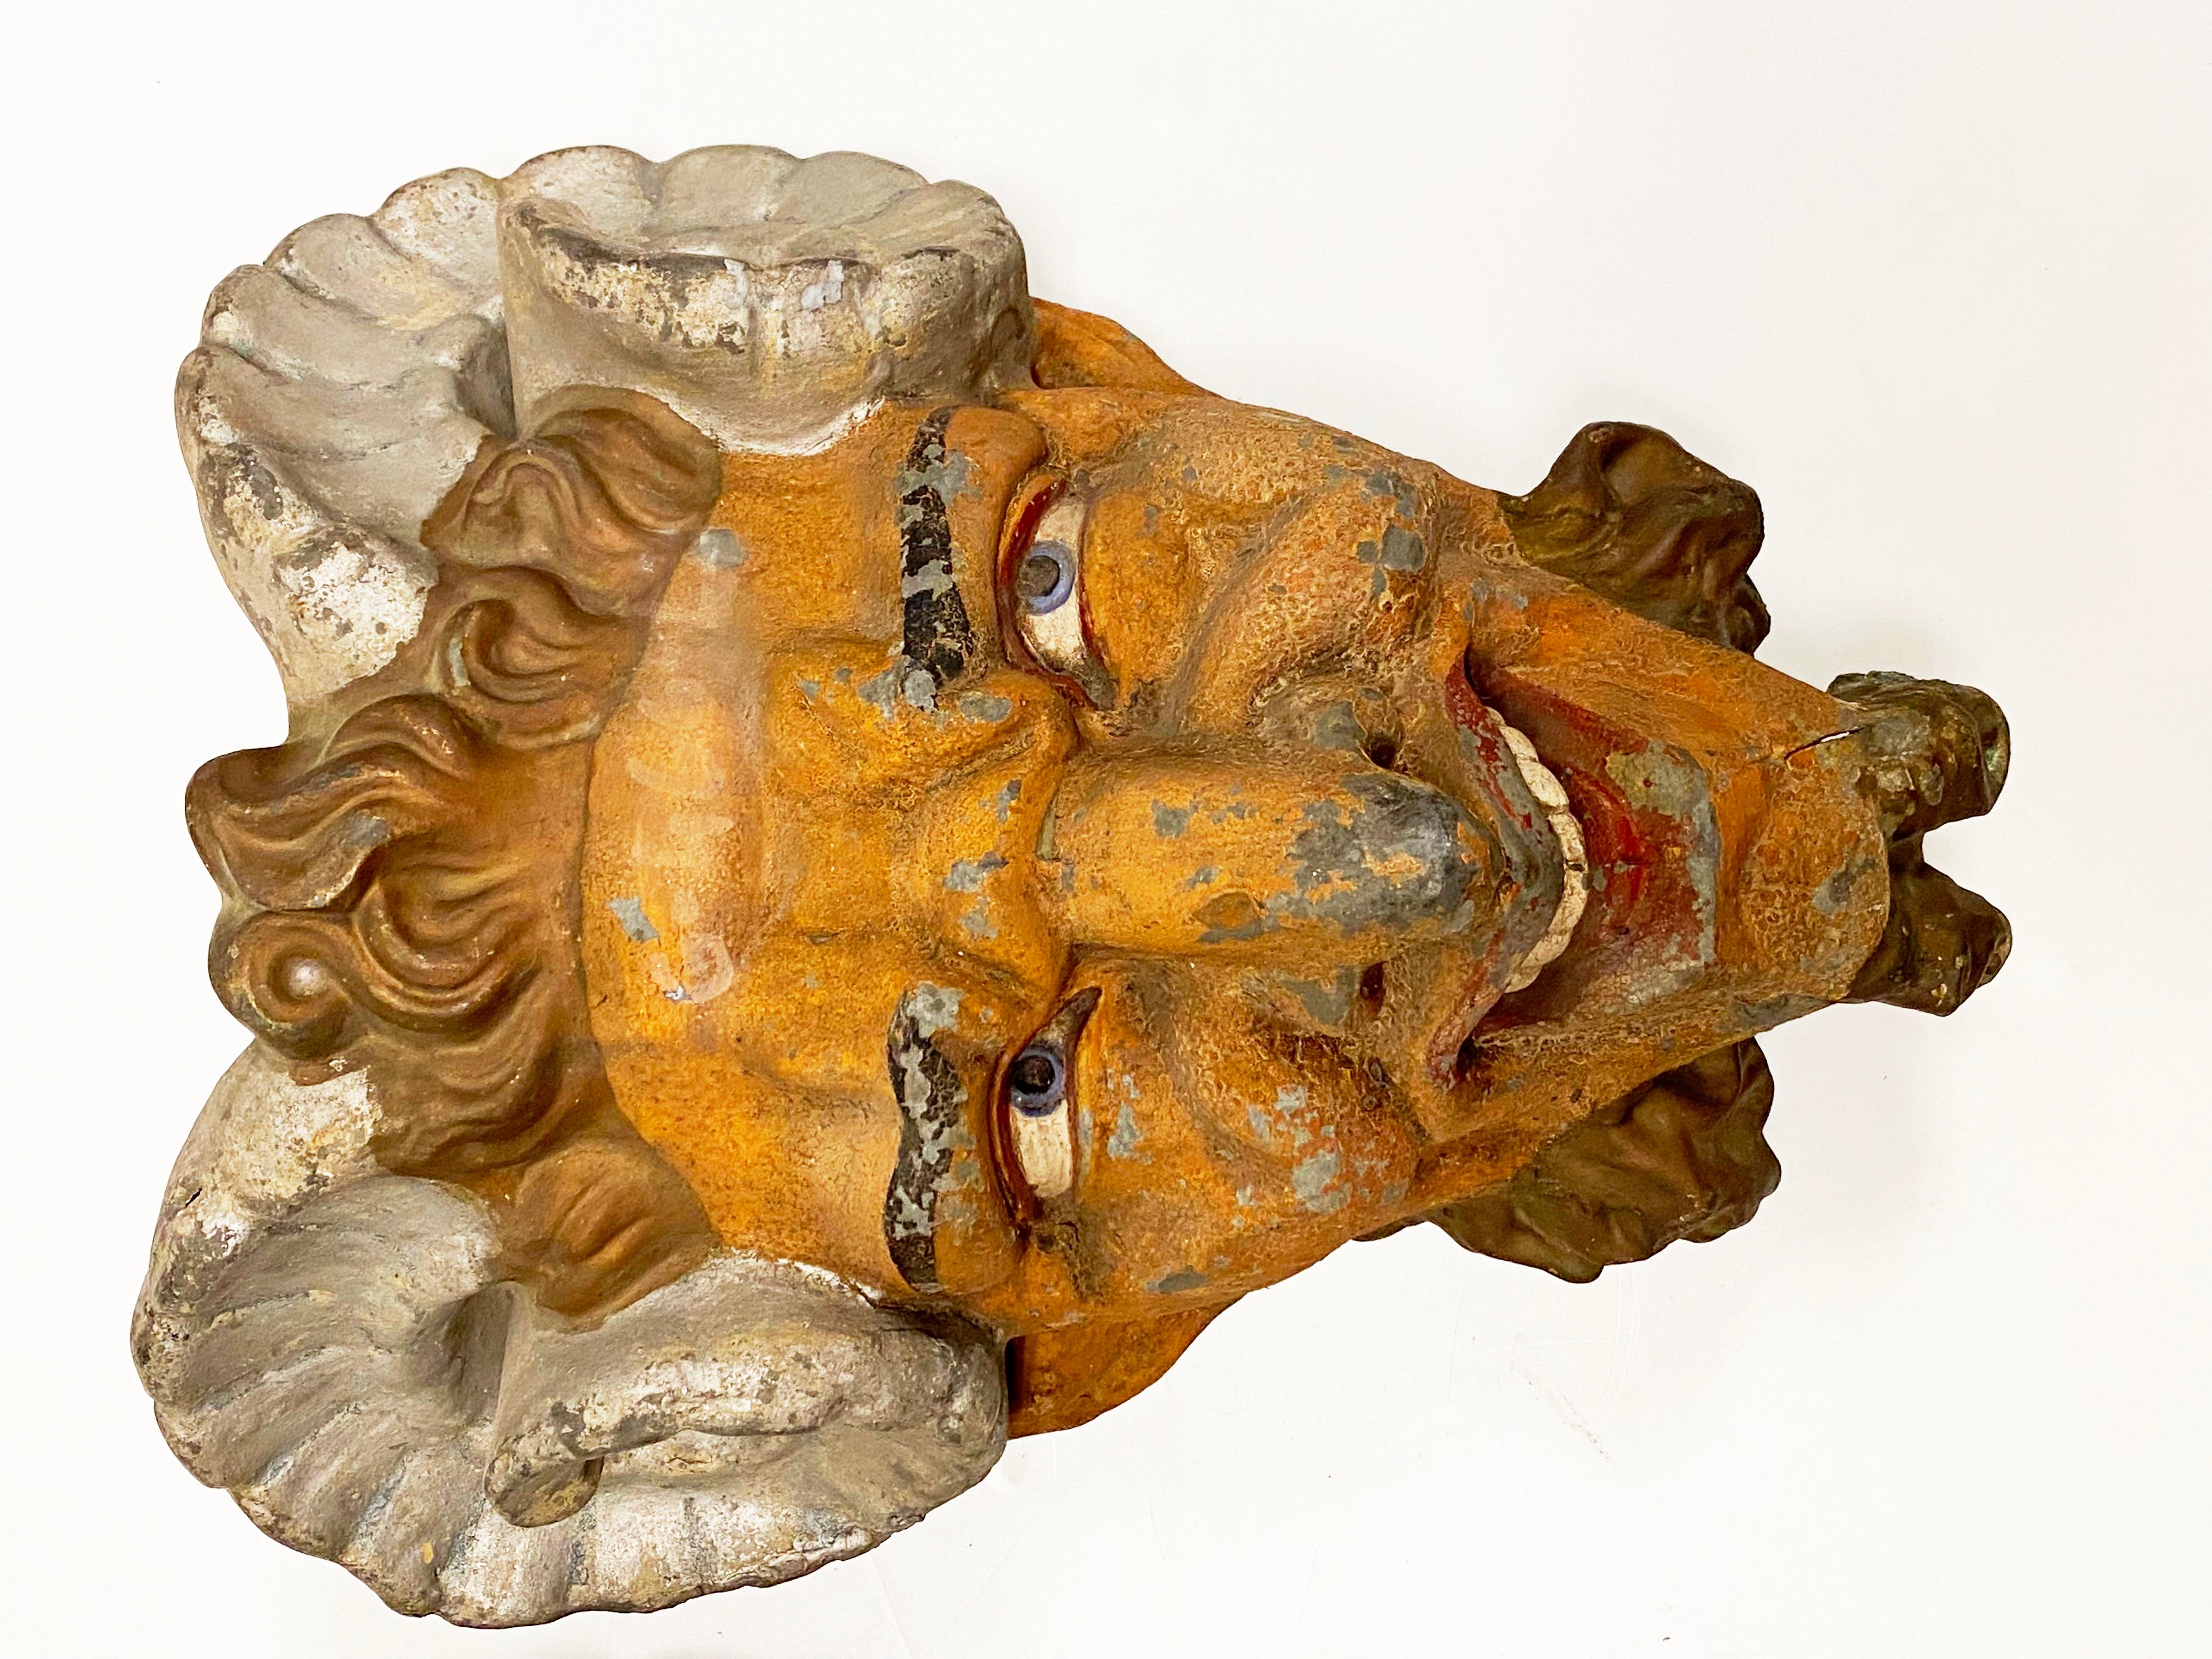 French belle epoque period pair of faun or satyr head wall ornaments in painted zinc, likely from an amusement park.